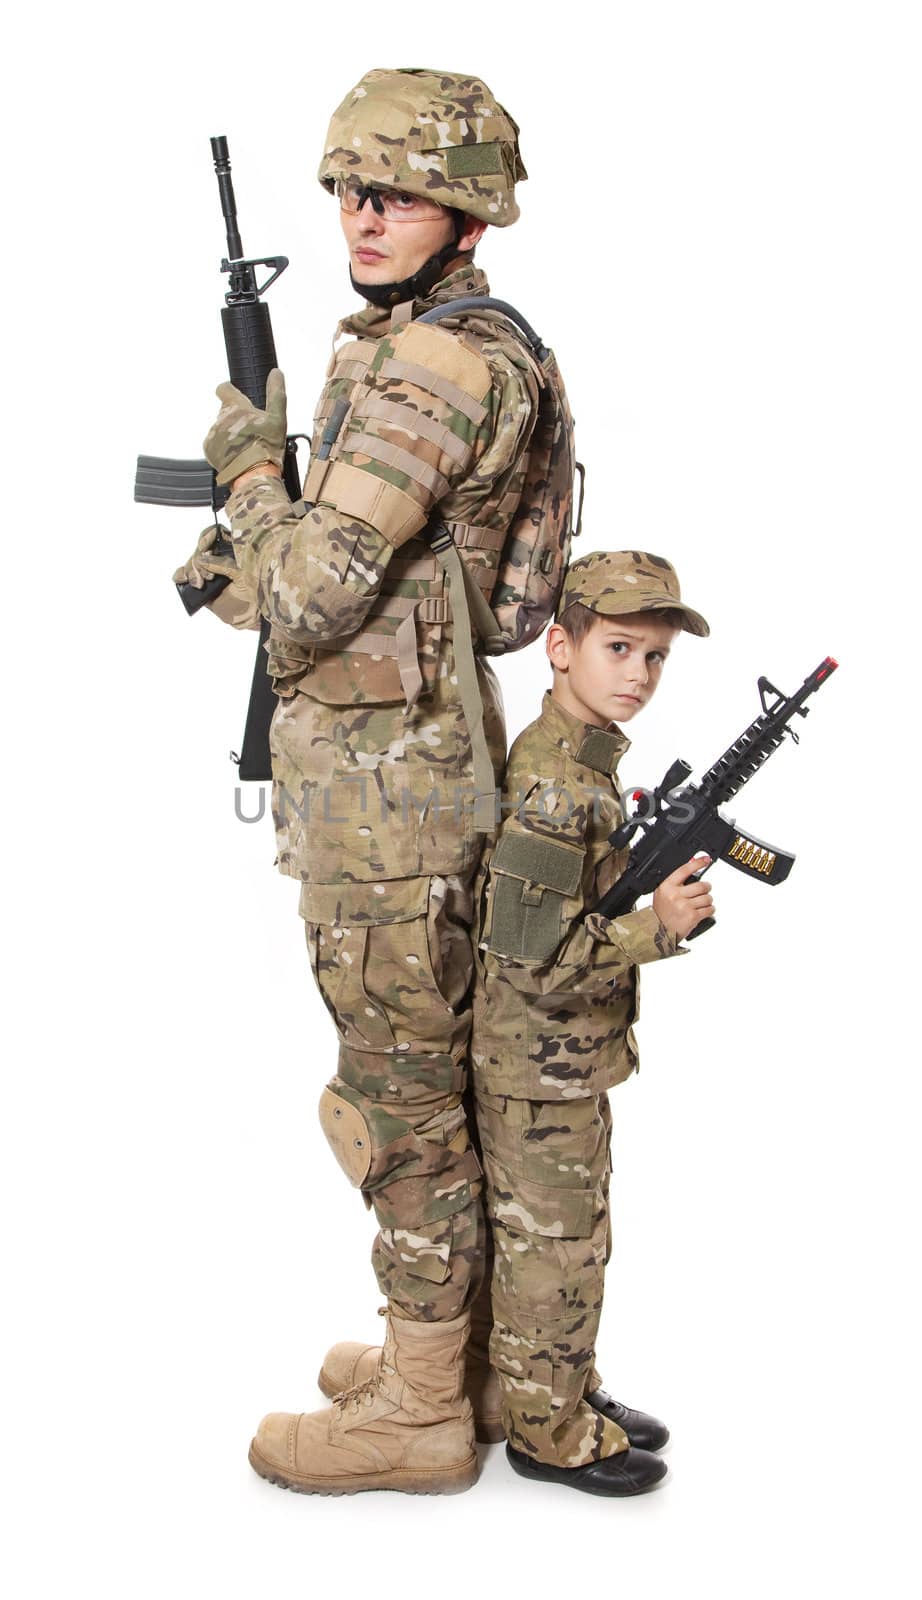 Military Father and Son isolated on white background